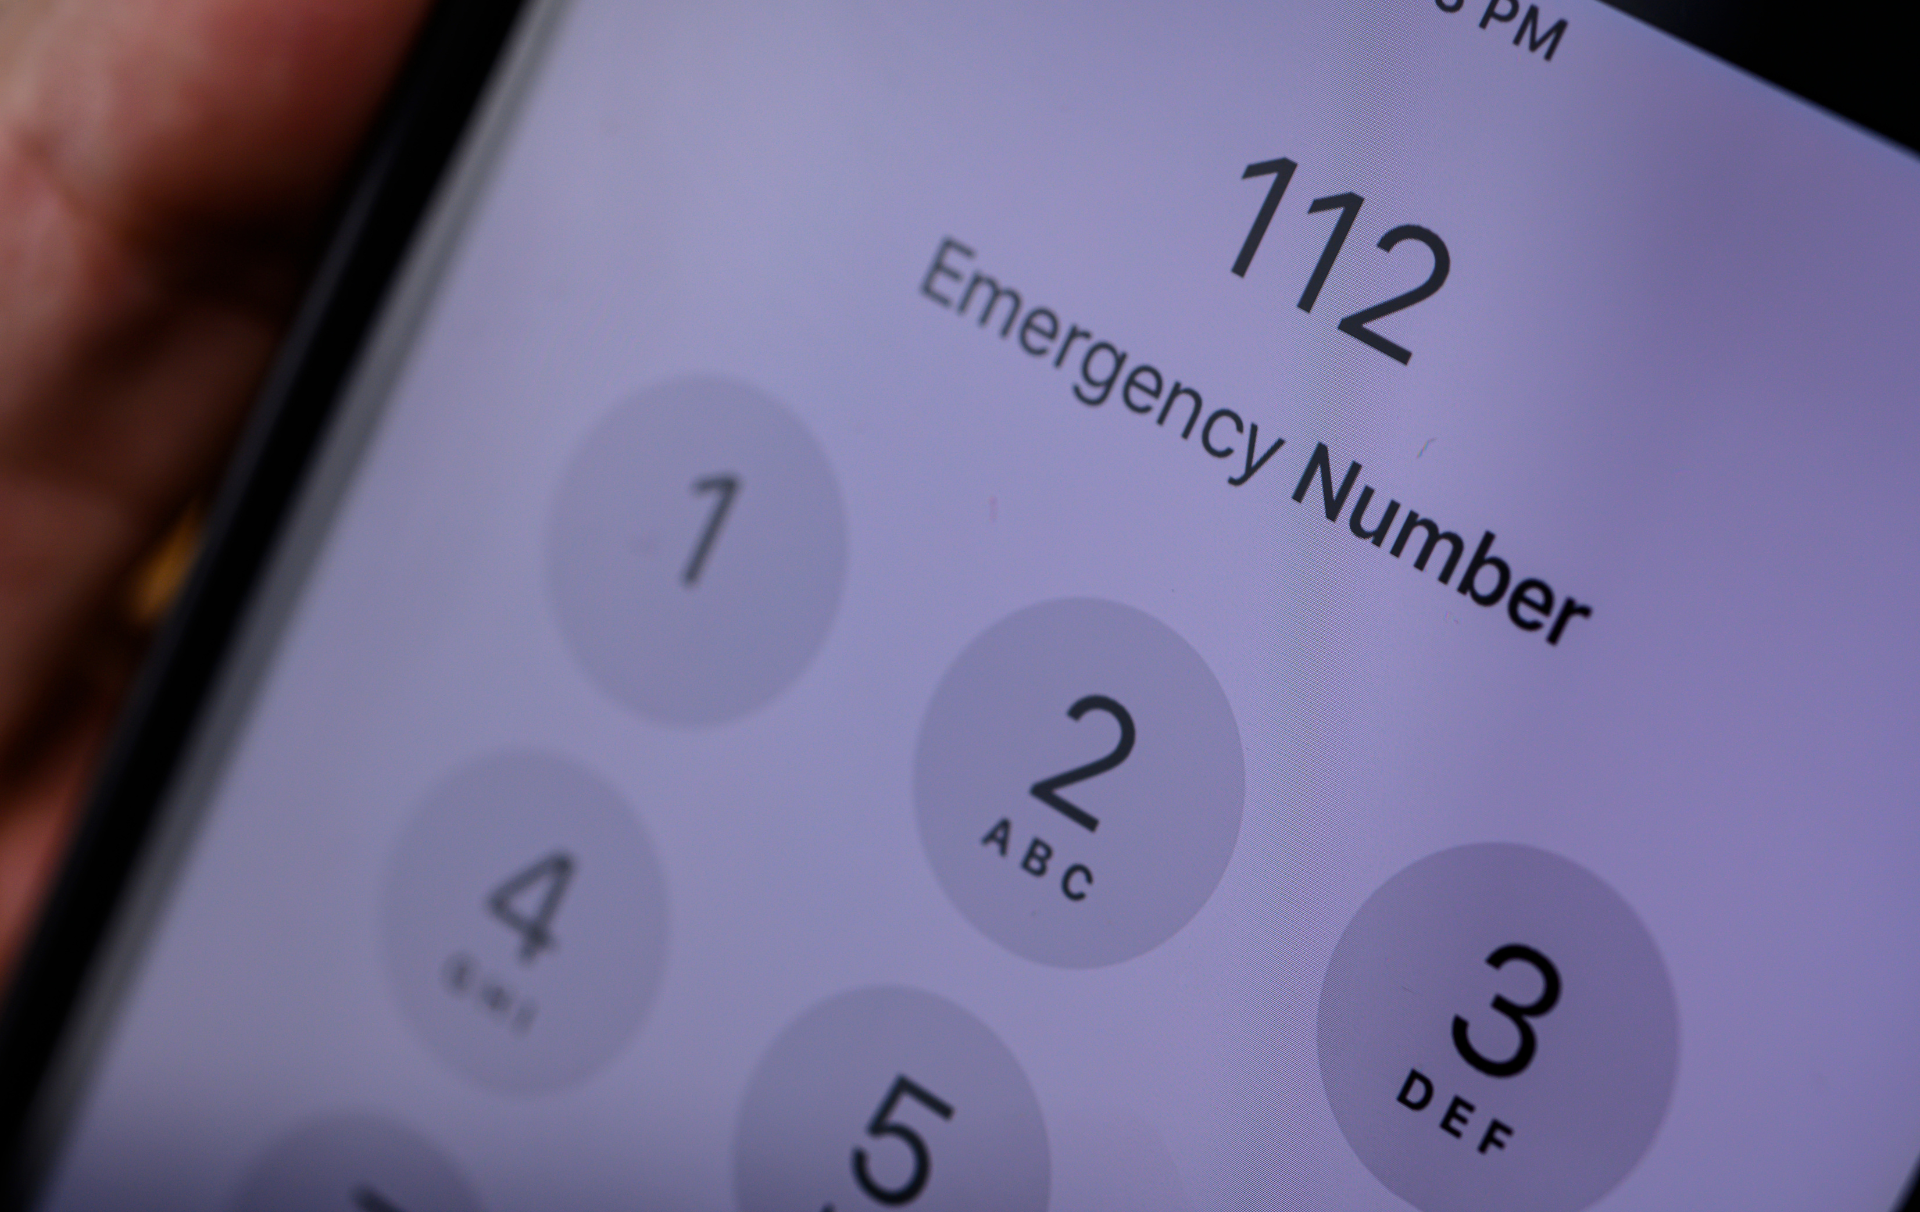 A phone with a call waiting that shows '112 - Emergency Number' on the screen